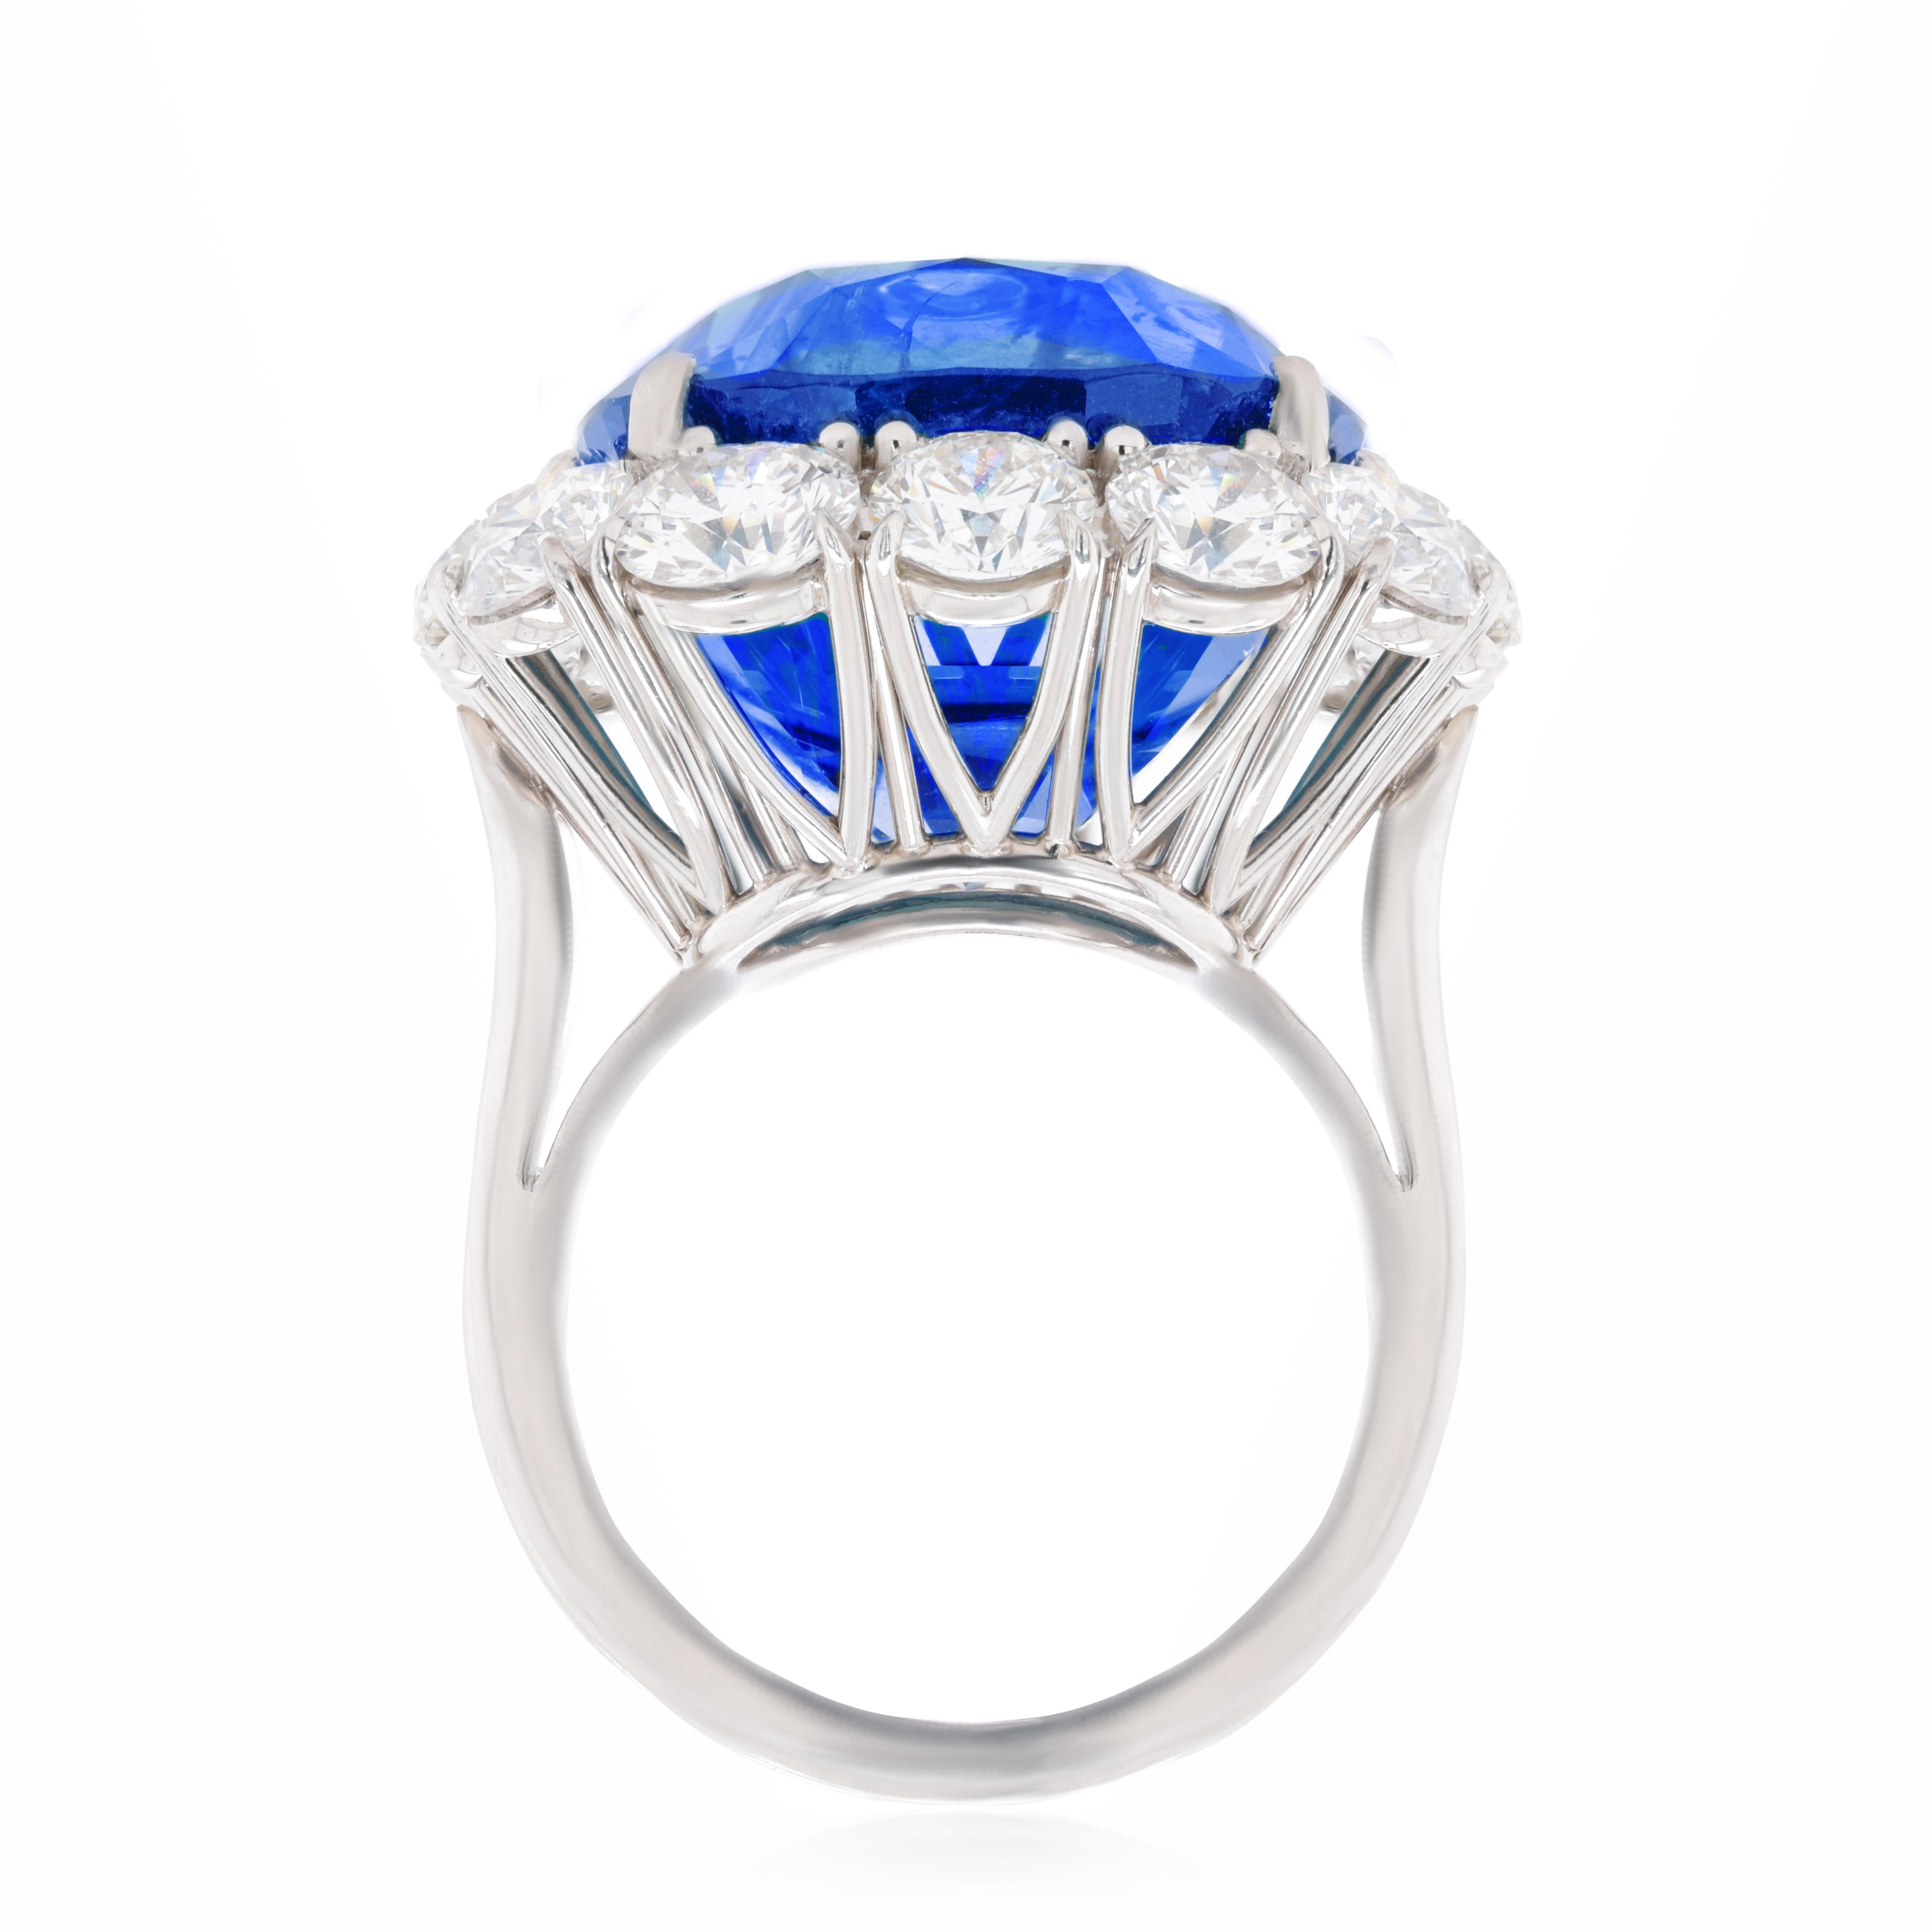 Platinum sapphire and diamonds ring featuring a 33.25 ct GIA certified Sri Lanka cushion cut blue sapphire surrounded by 5.60 cts tw of round diamonds.
Diana M. is a leading supplier of top-quality fine jewelry for over 35 years.
Diana M is one-stop